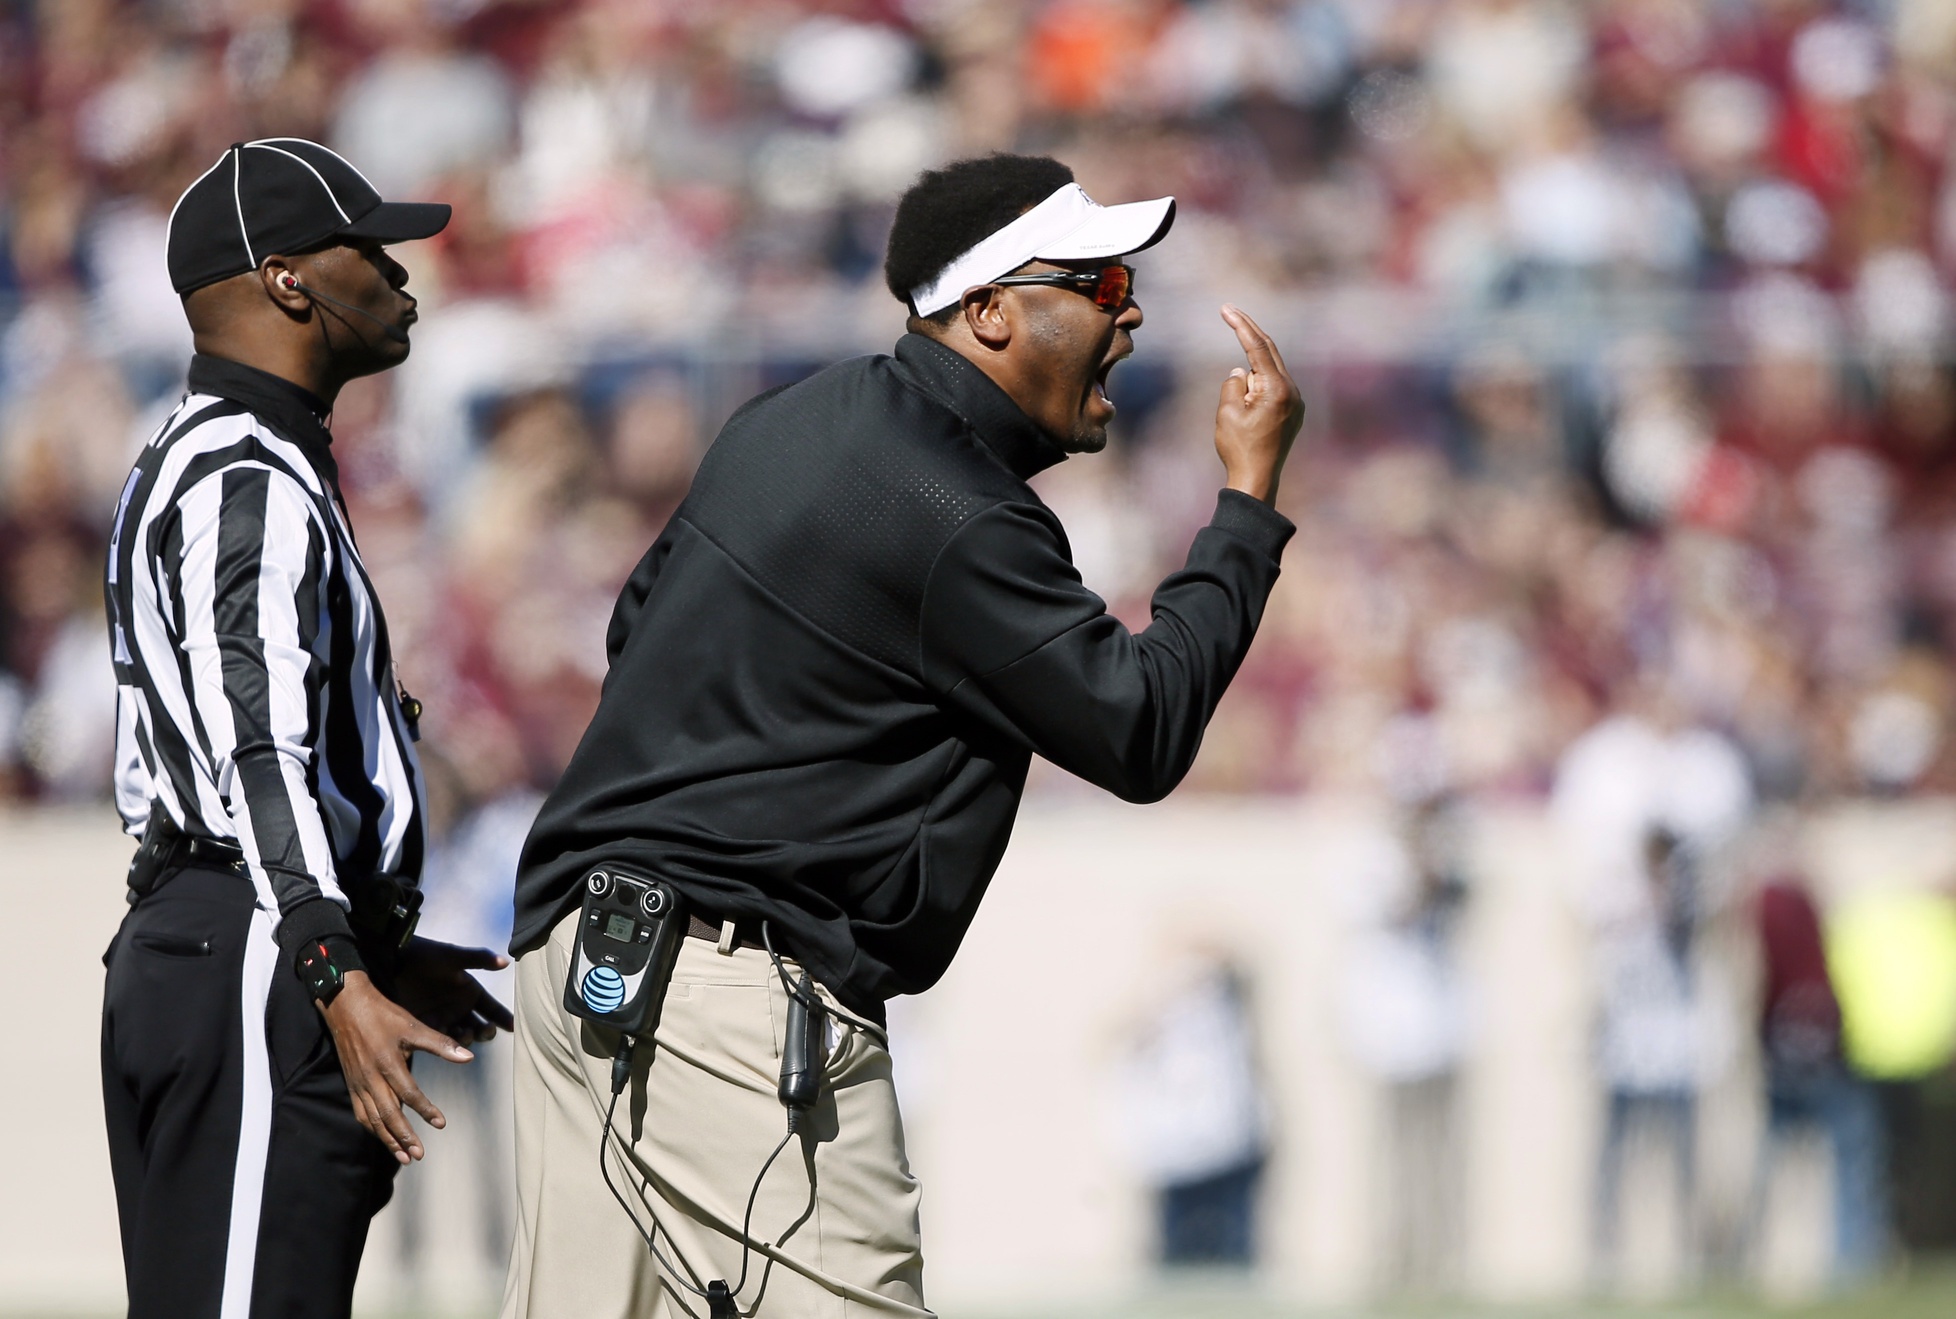 Nov 19, 2016; College Station, TX, USA; Texas A&M Aggies head coach Kevin Sumlin on the sidelines against the University of Texas at San Antonio Roadrunners at Kyle Field. Mandatory Credit: Erich Schlegel-USA TODAY Sports